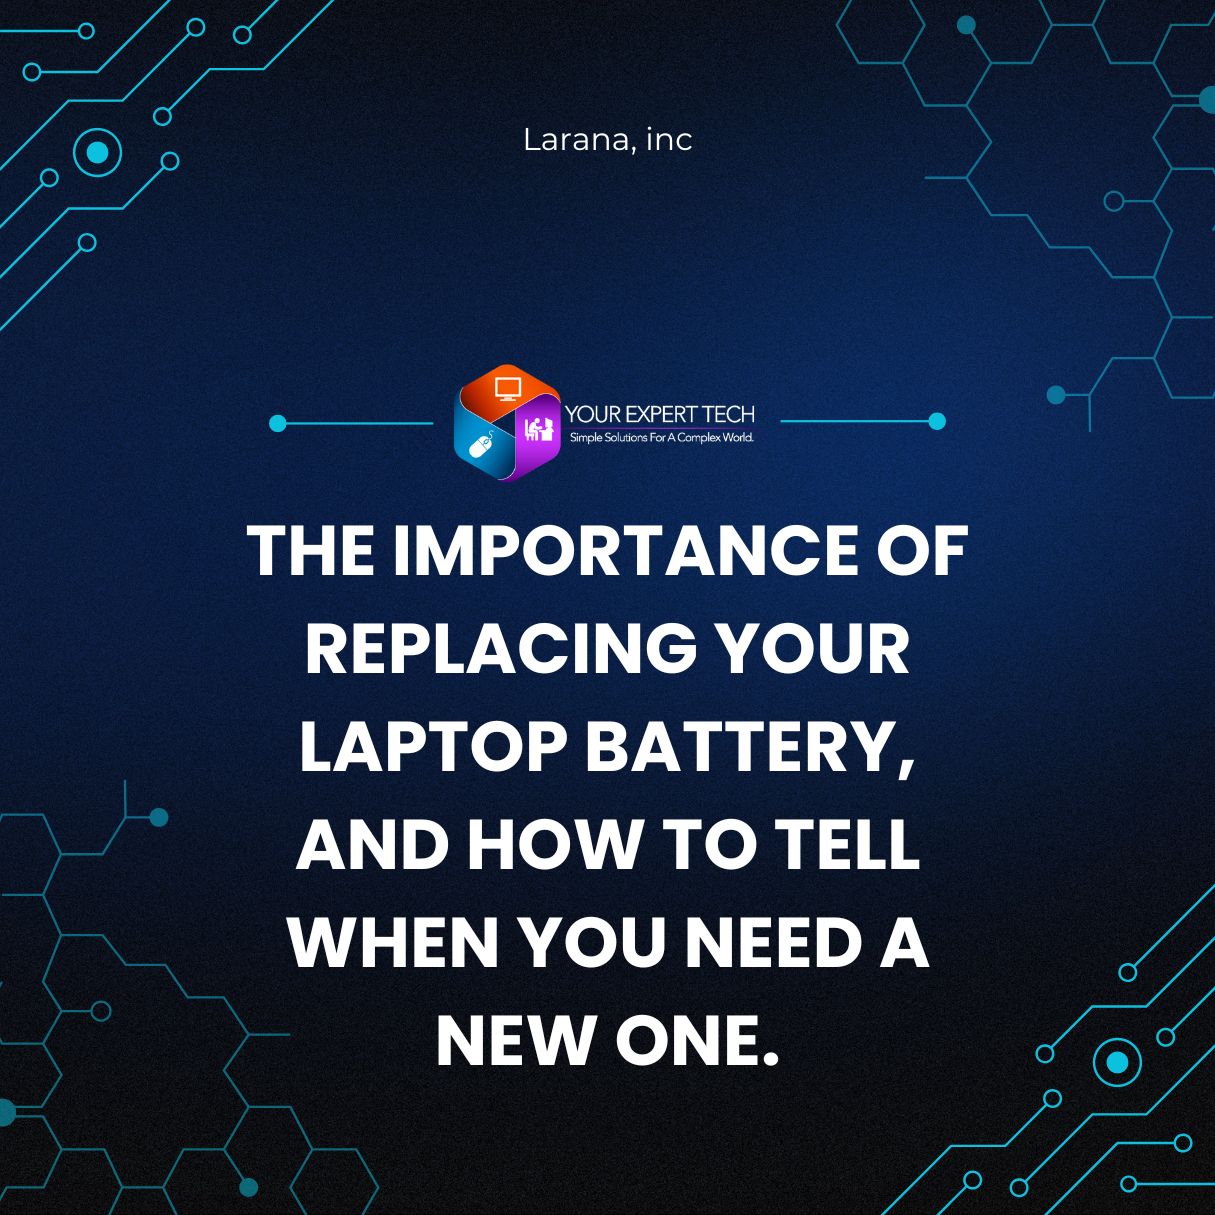 A sleek social media graphic with a deep blue background featuring circuit-like designs. At the top, text reads "Larana, inc" with the logo of 'Your Expert Tech' below it. The main message in bold white letters states "THE IMPORTANCE OF REPLACING YOUR LAPTOP BATTERY, AND HOW TO TELL WHEN YOU NEED A NEW ONE." The style is modern and tech-oriented.